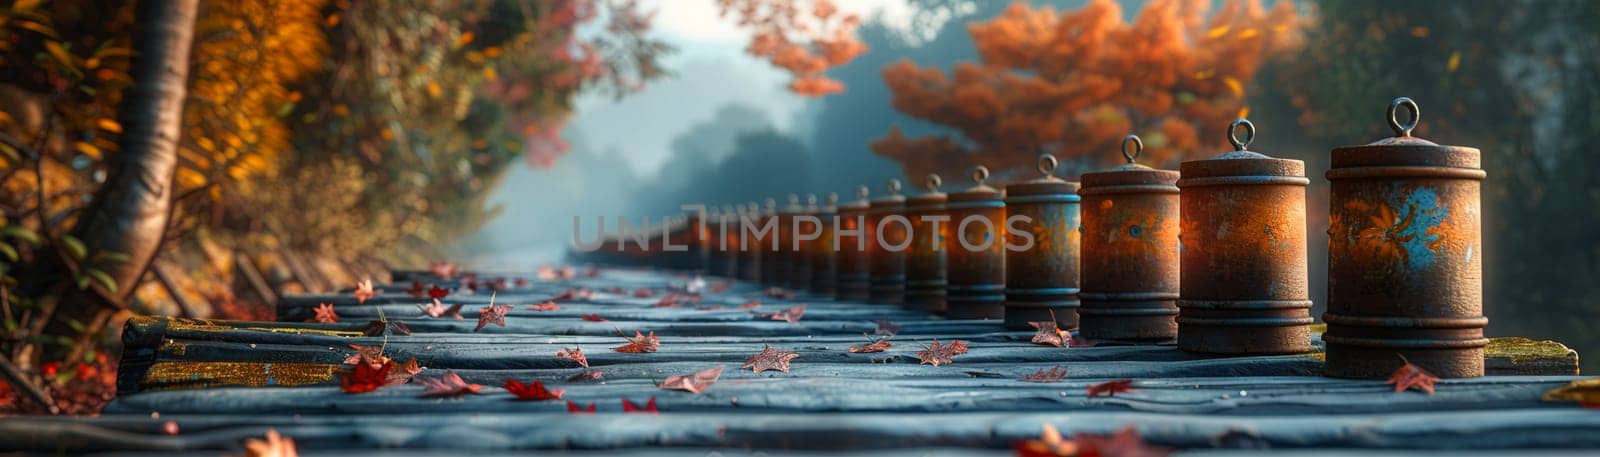 Buddhist Prayer Wheels Spinning Alongside a Mountain Path, The motion blur suggests the ongoing prayers and spirituality of the faithful.